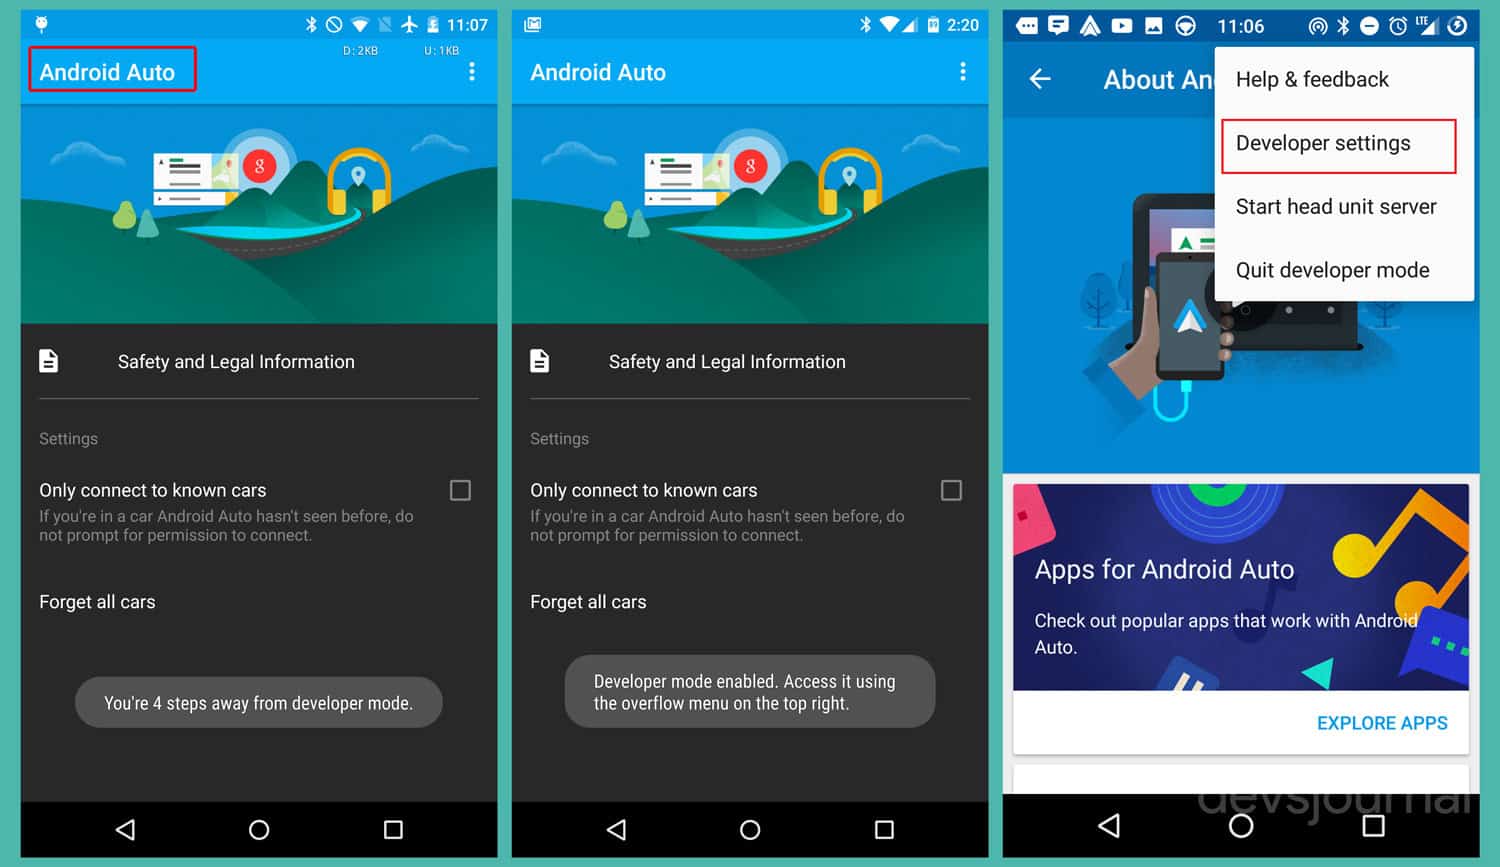 How to enable Developer Settings in Android Auto to use YouTube